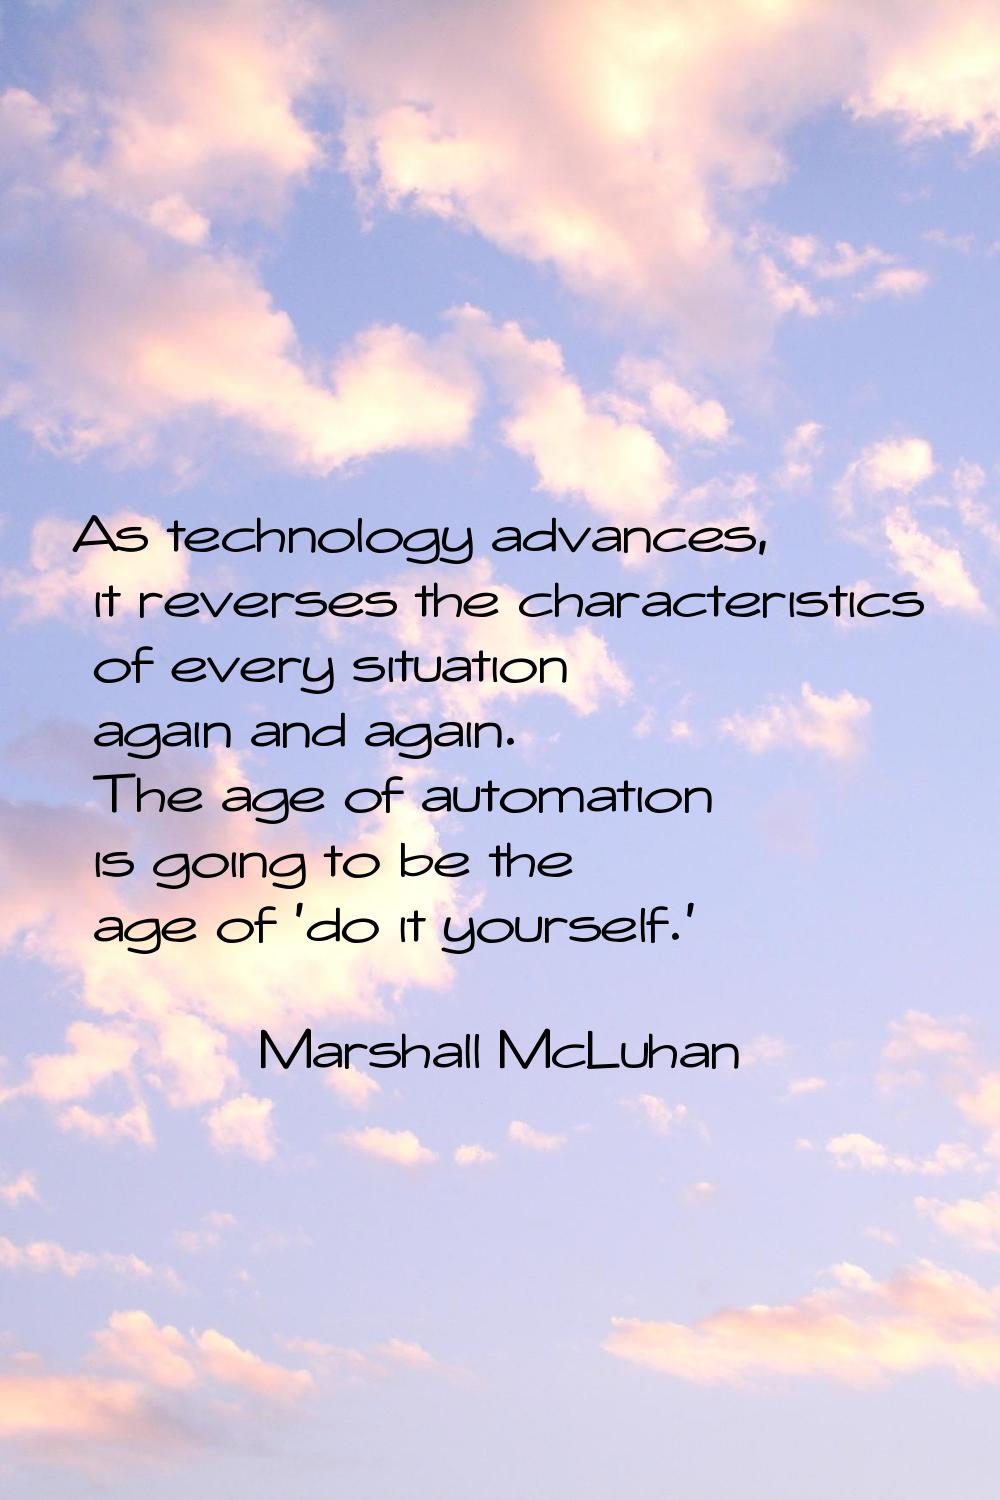 As technology advances, it reverses the characteristics of every situation again and again. The age